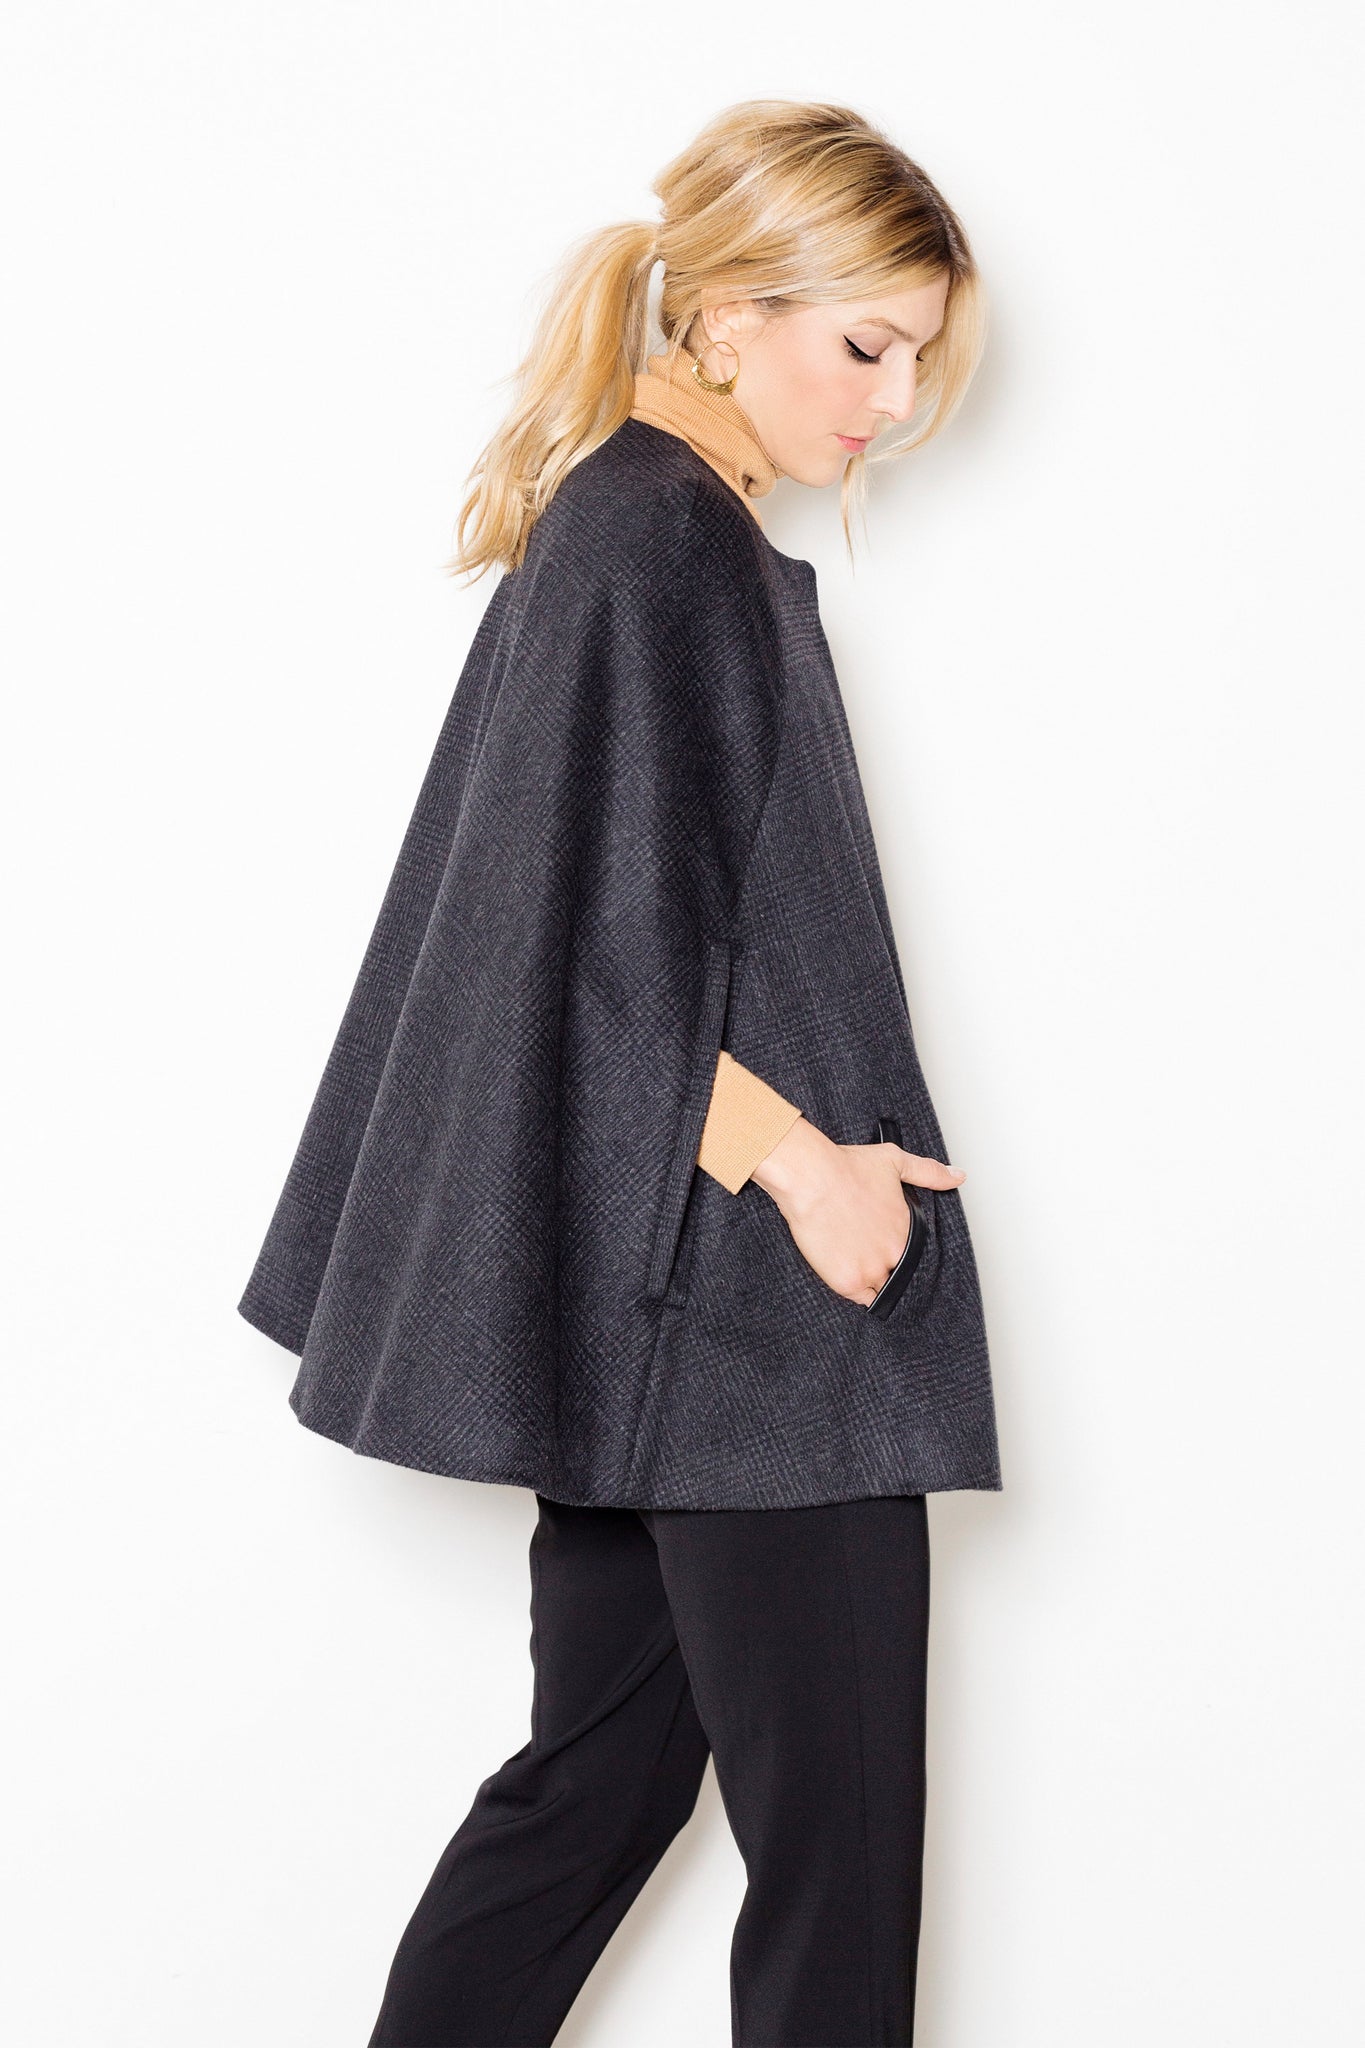 Cape Jacket RTW in Charcoal Plaid Wool